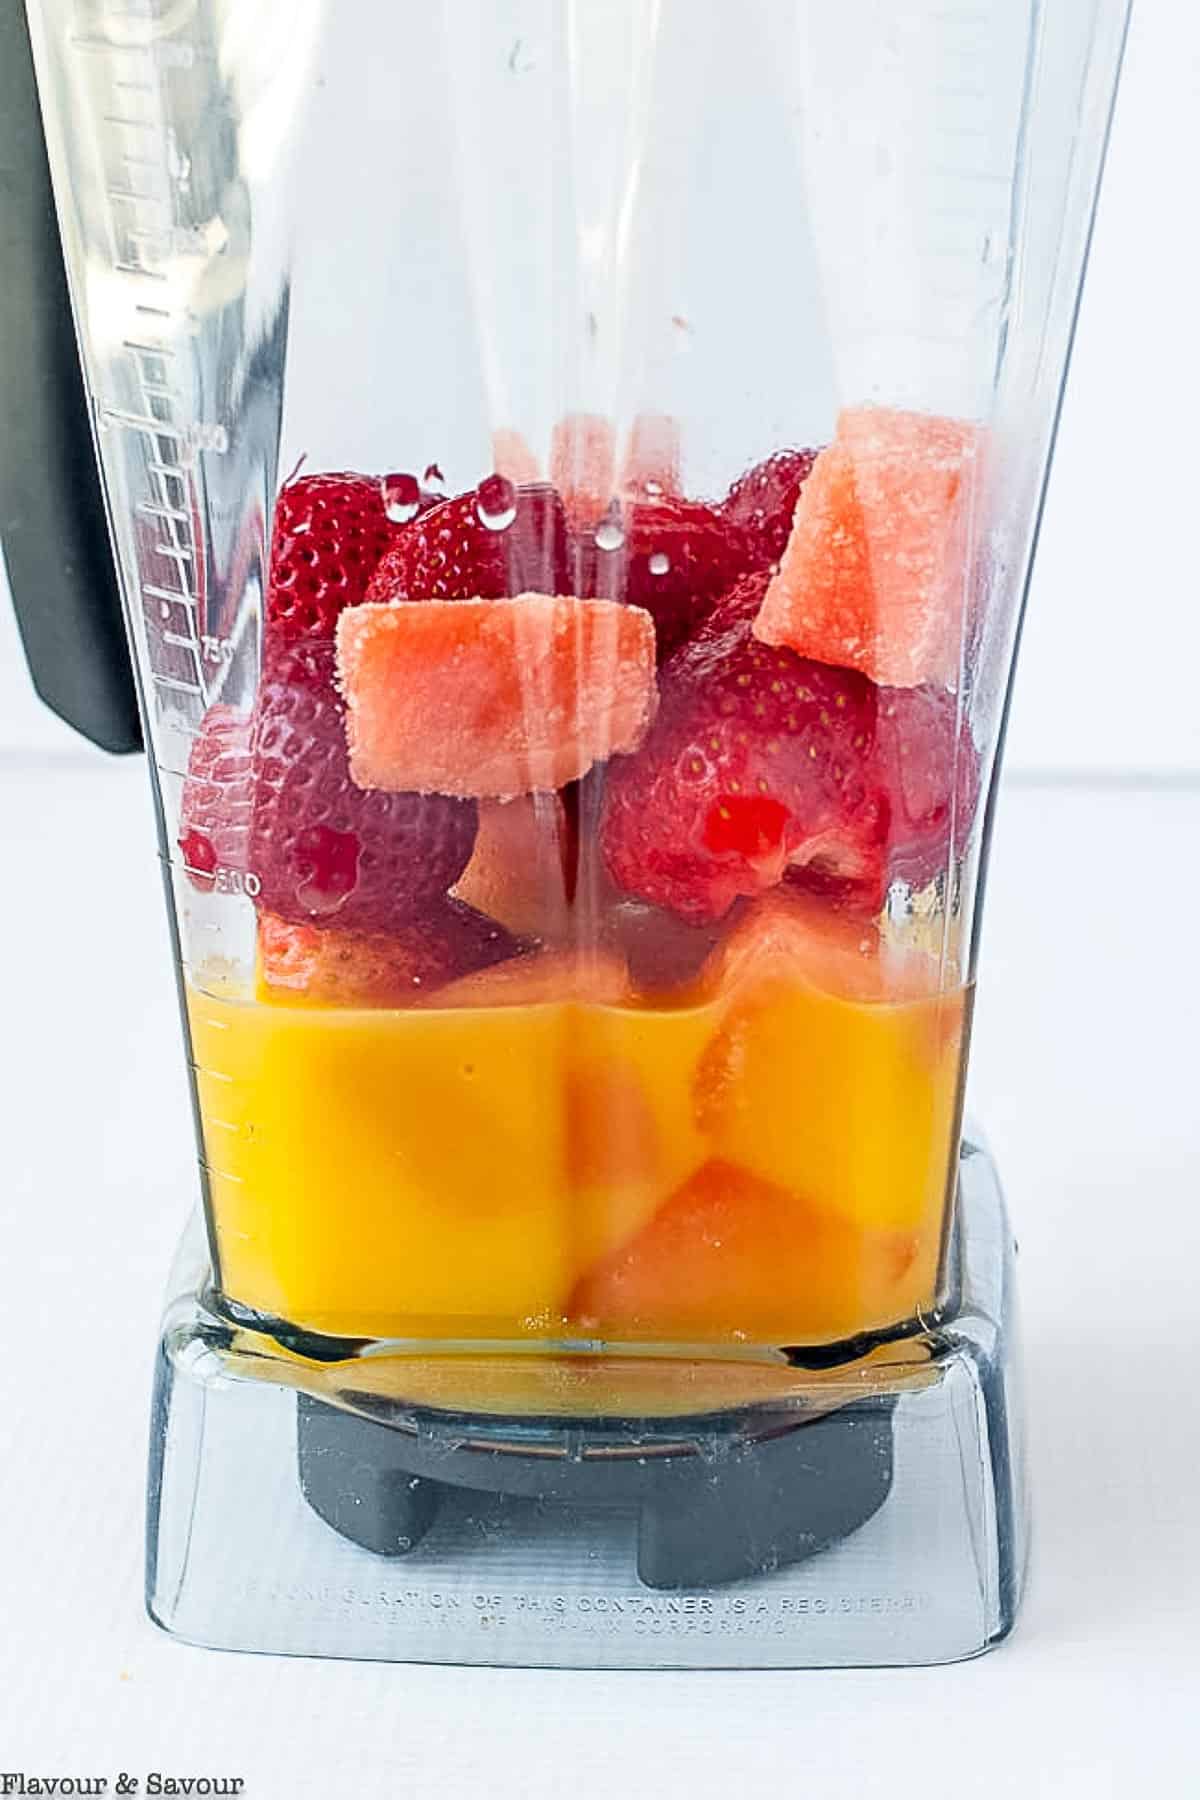 Ingredients for strawberry watermelon smoothie in a blender container.